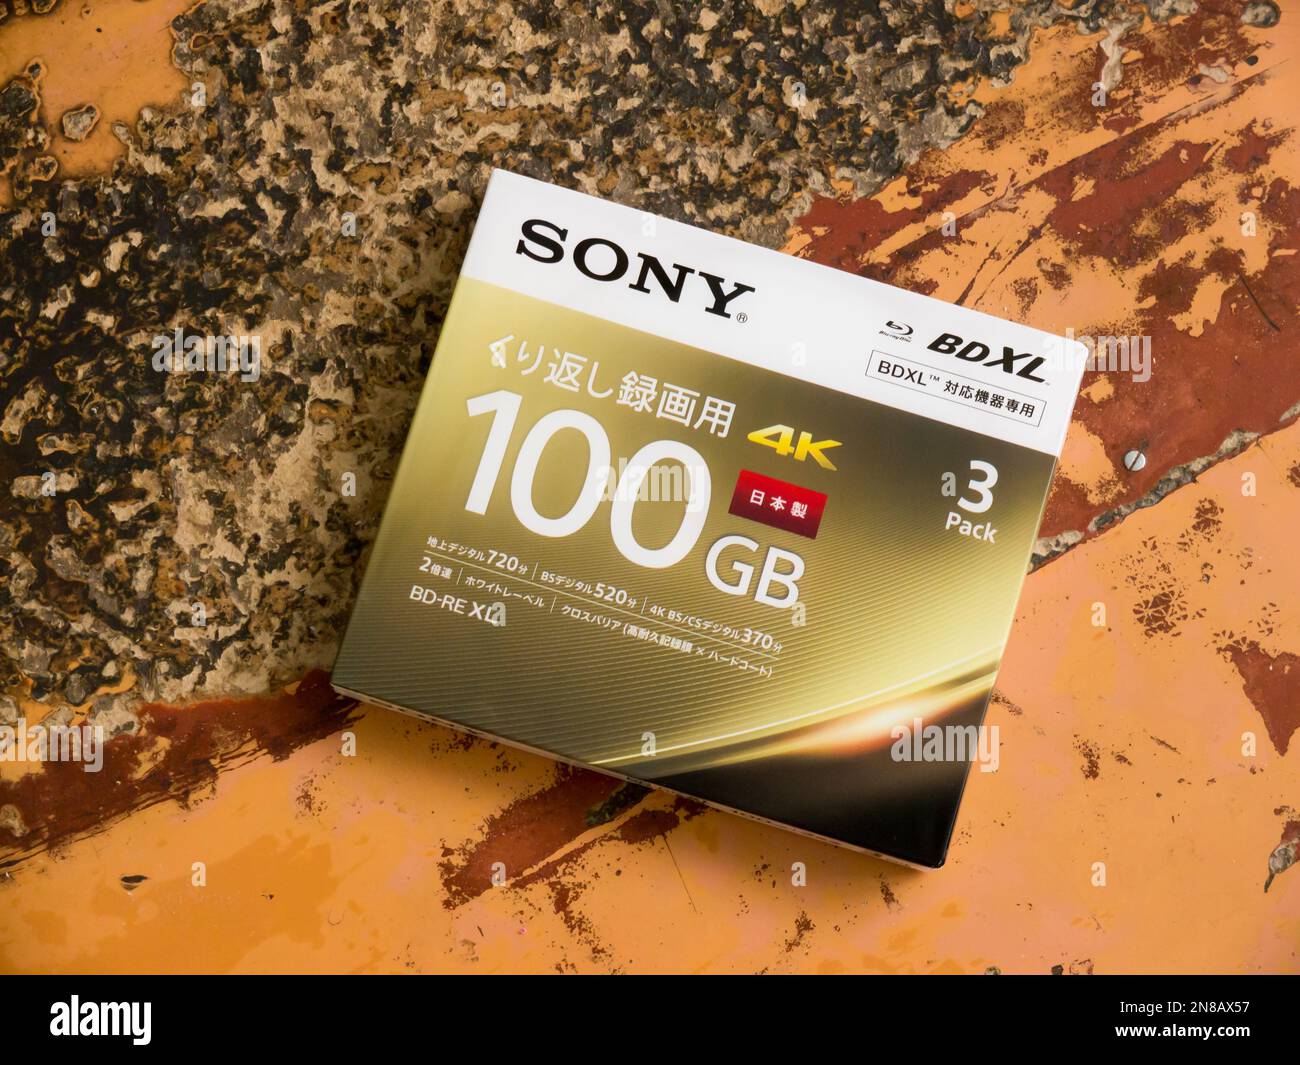 SONY BD- RE  BDXL 100GB, 3BNE3VEPS2. Sony Corporation is a Japanese multinational conglomerate corporation headquartered in Konan, Minato, Tokyo. Stock Photo